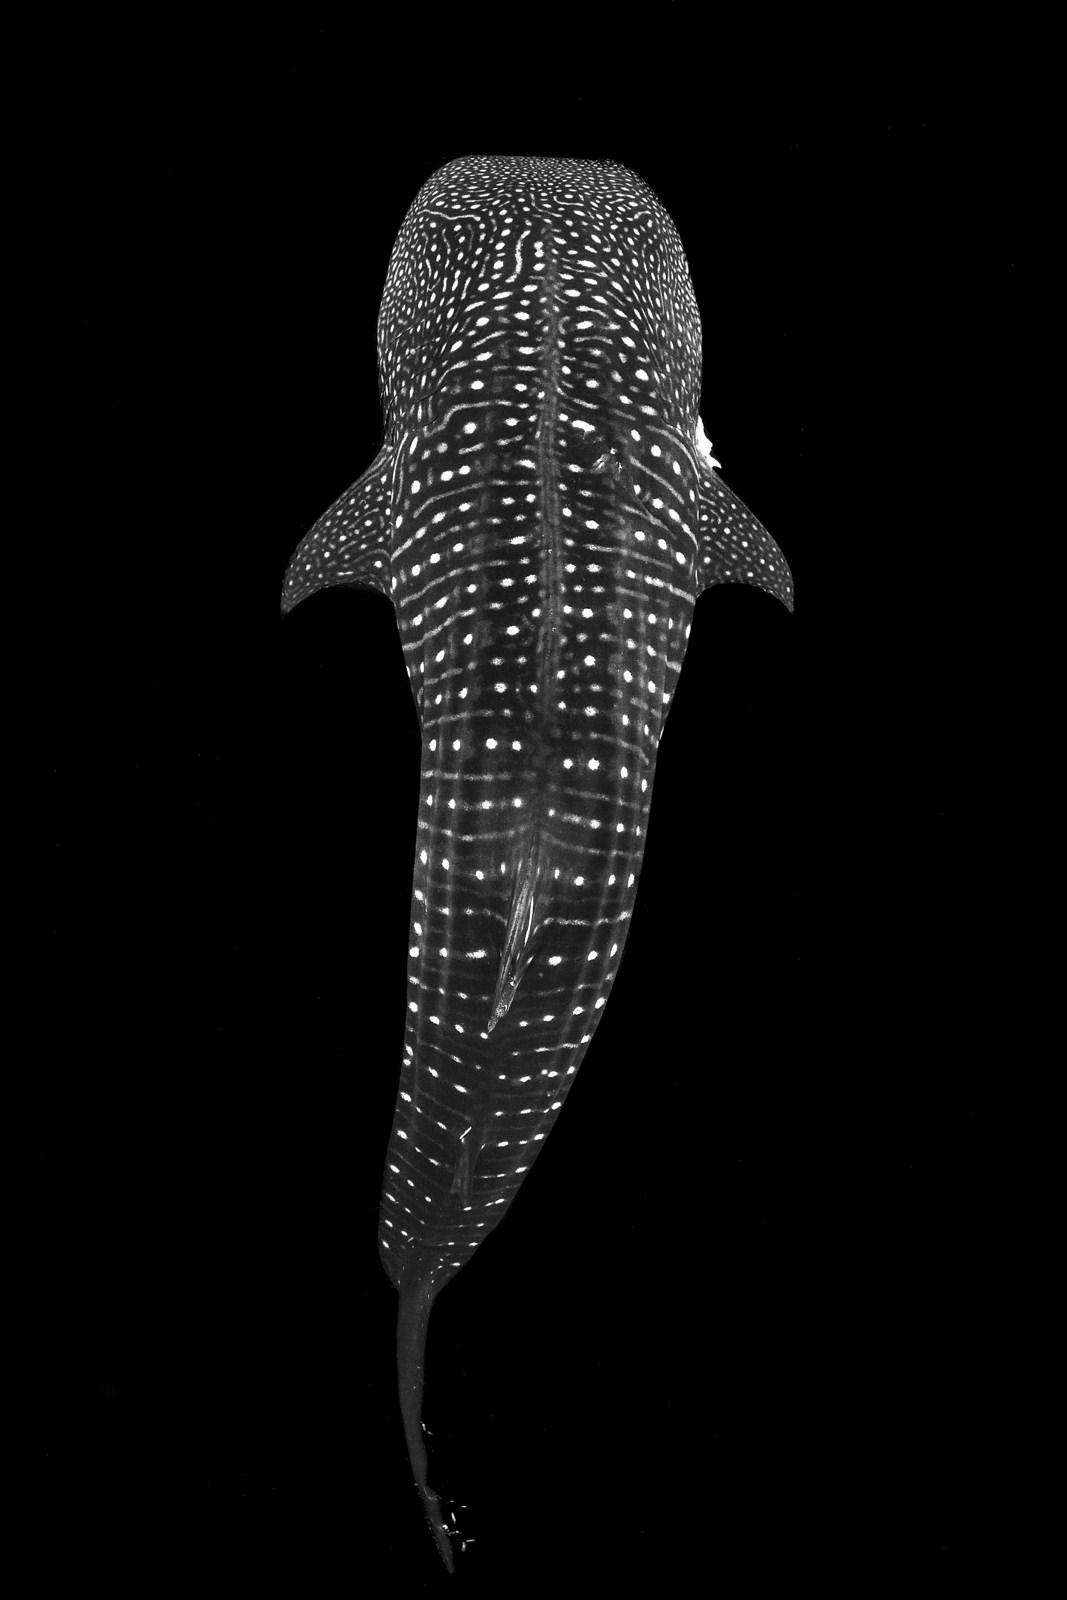 Whale Shark - Underwater Photography by Damien Mauric